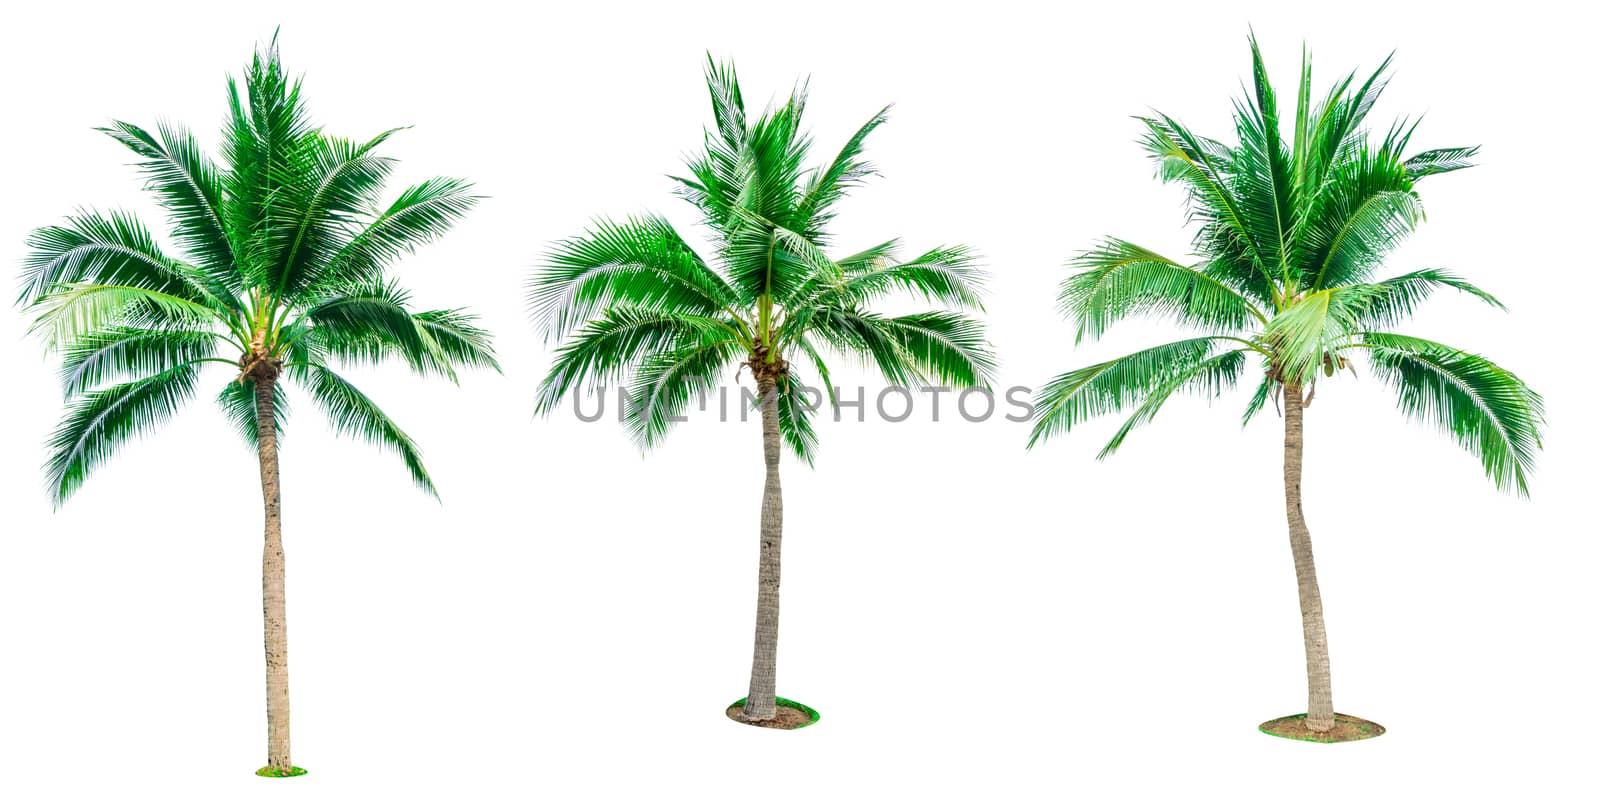 Set of coconut tree isolated on white background used for advertising decorative architecture. Summer and beach concept. Tropical palm tree.